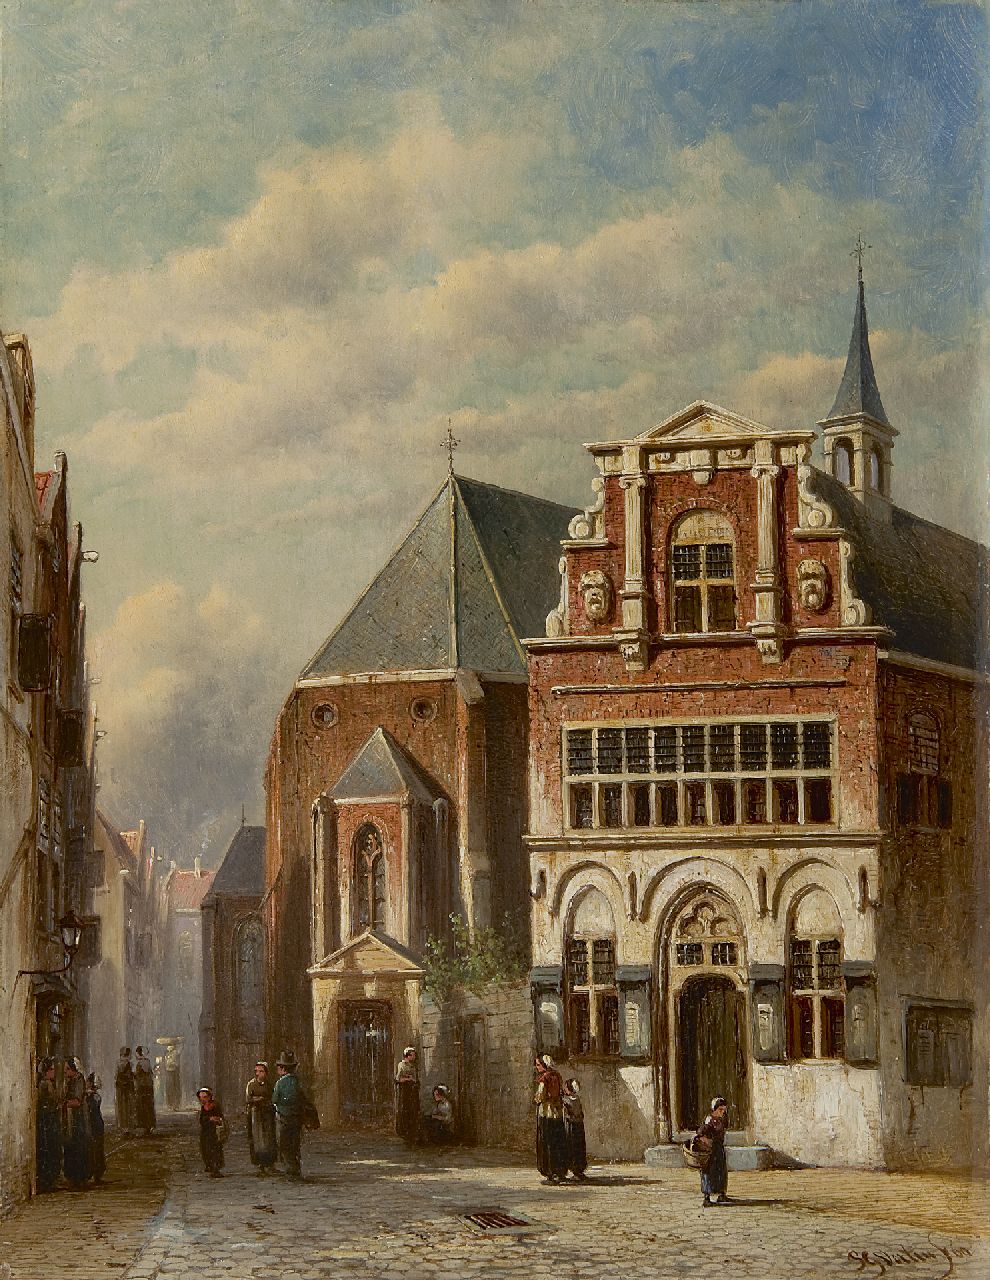 Vertin P.G.  | Petrus Gerardus Vertin, A view of the old town hall in Woerden, oil on panel 39.6 x 31.0 cm, signed l.r. and dated '69